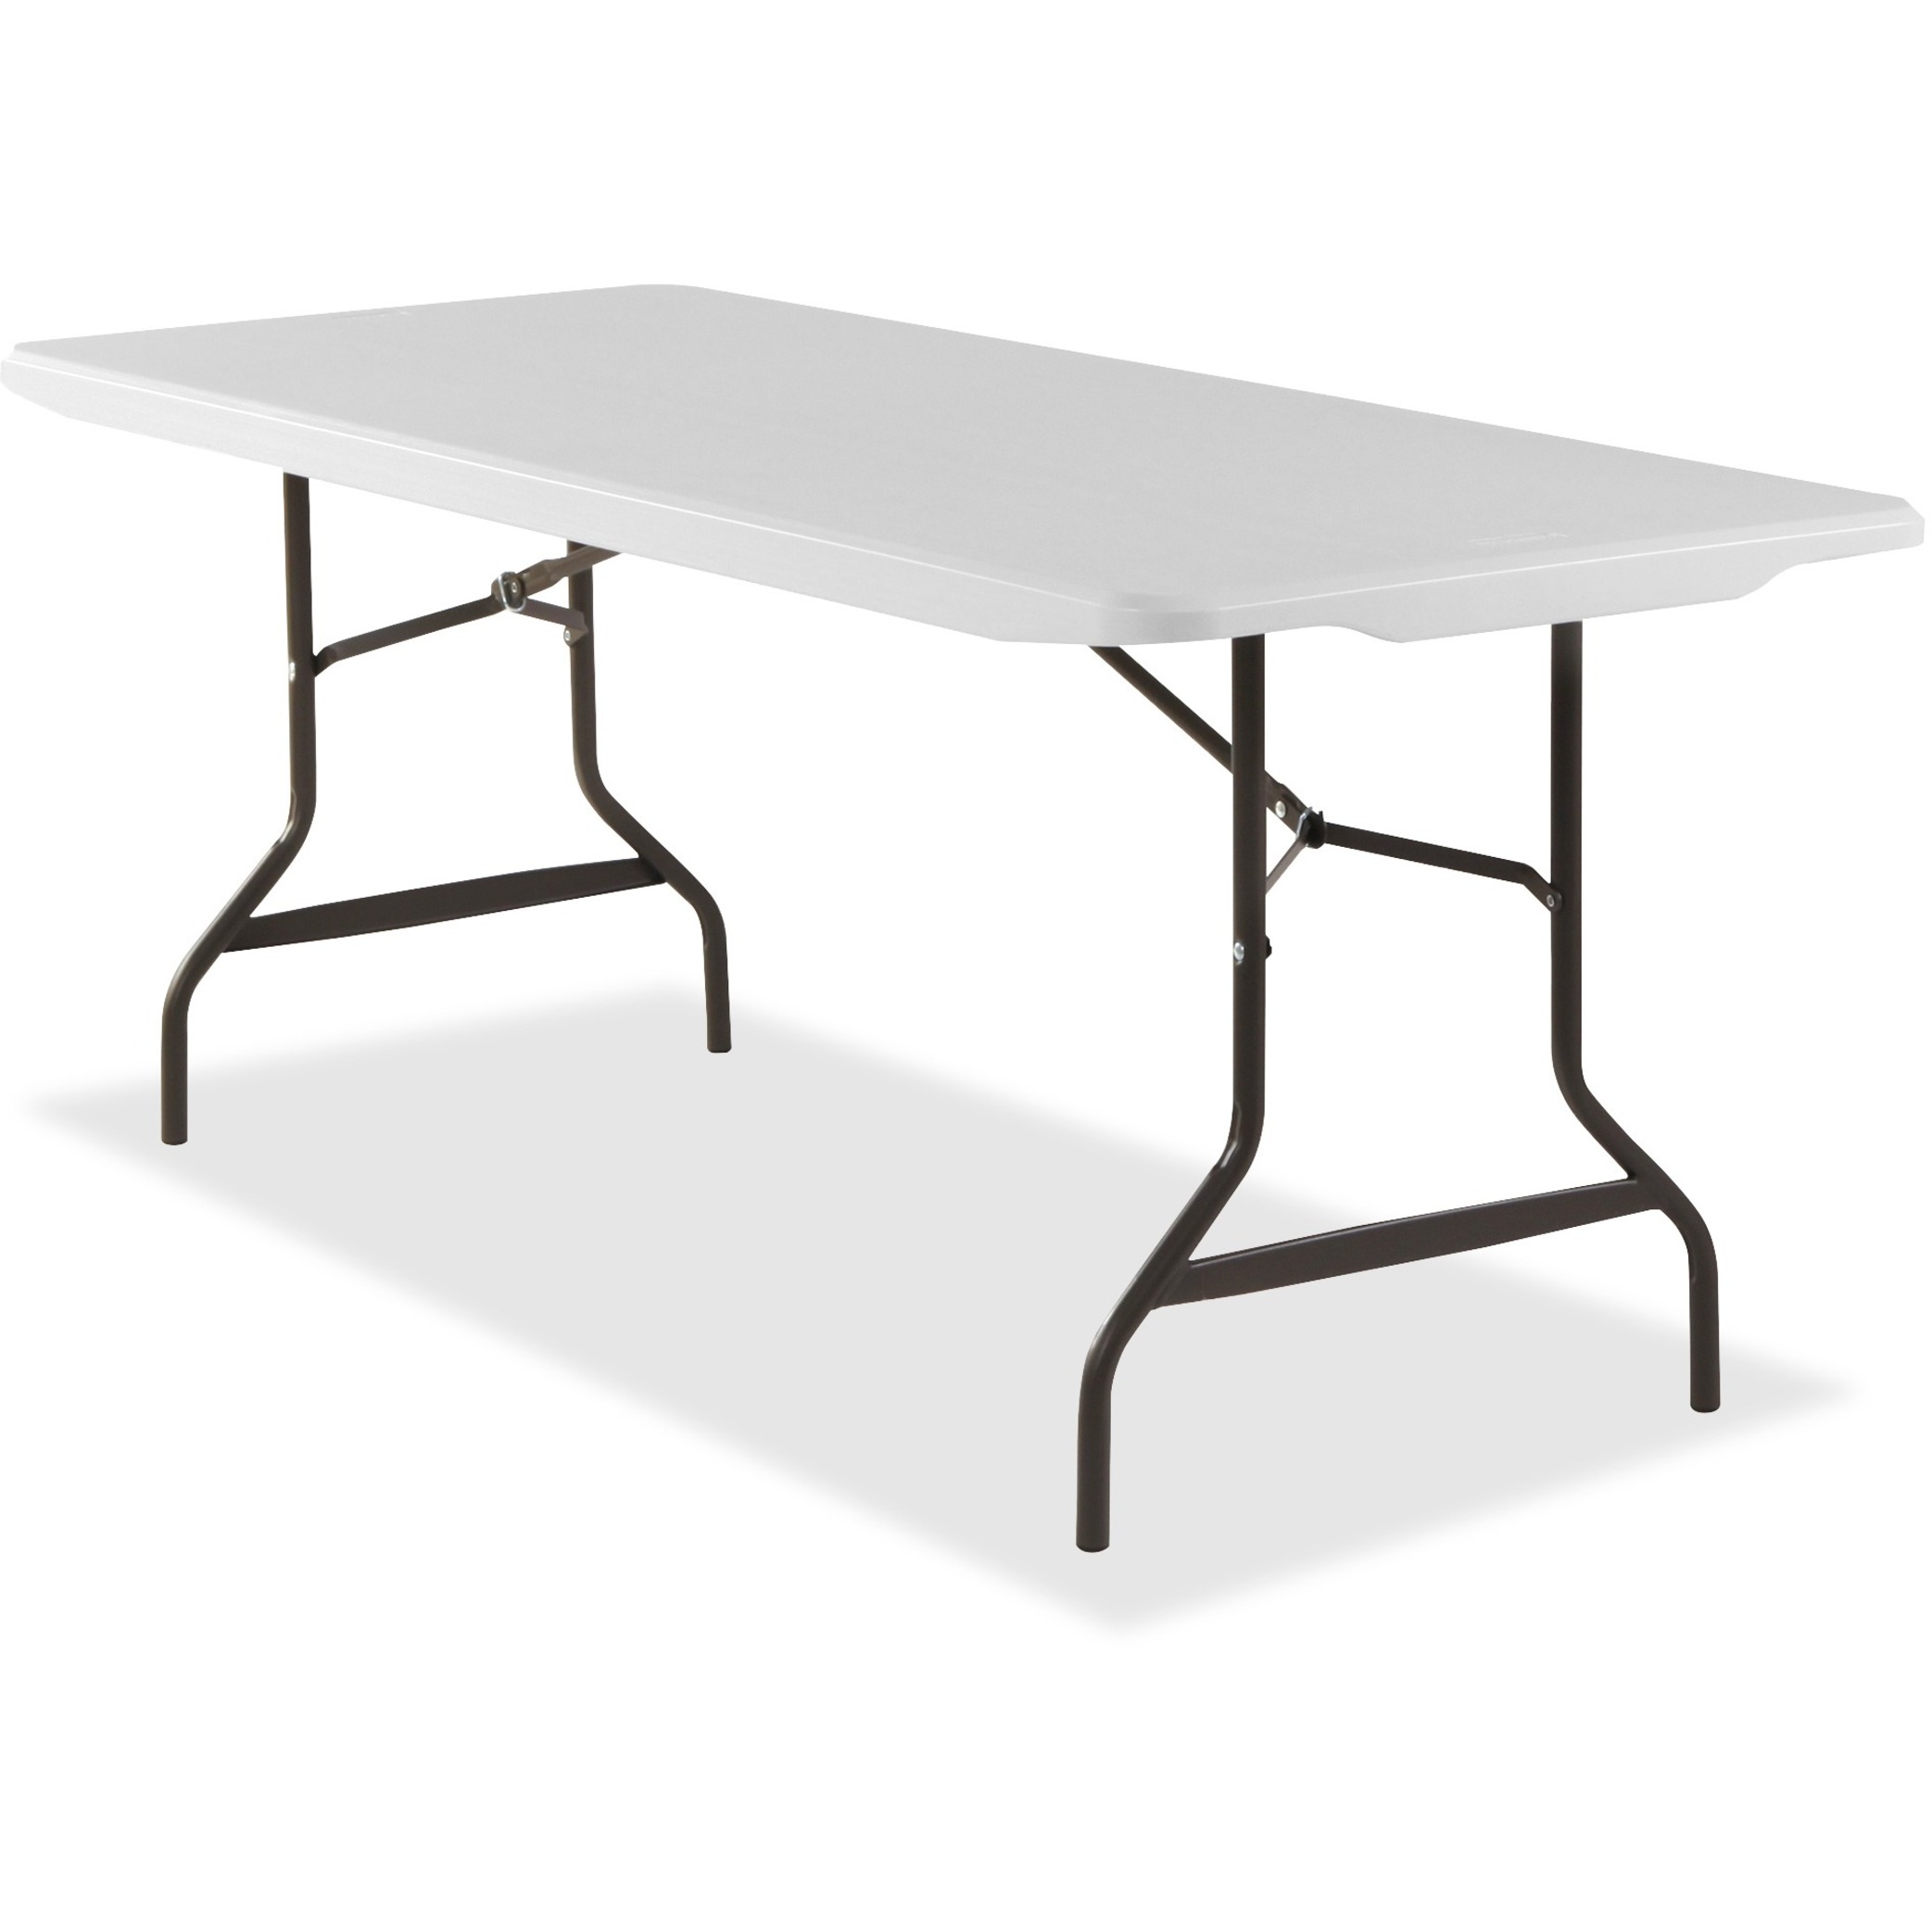 Iceberg 65533 30 X 96 In. Indestructable 500 Series Too Folding Table, Platinum